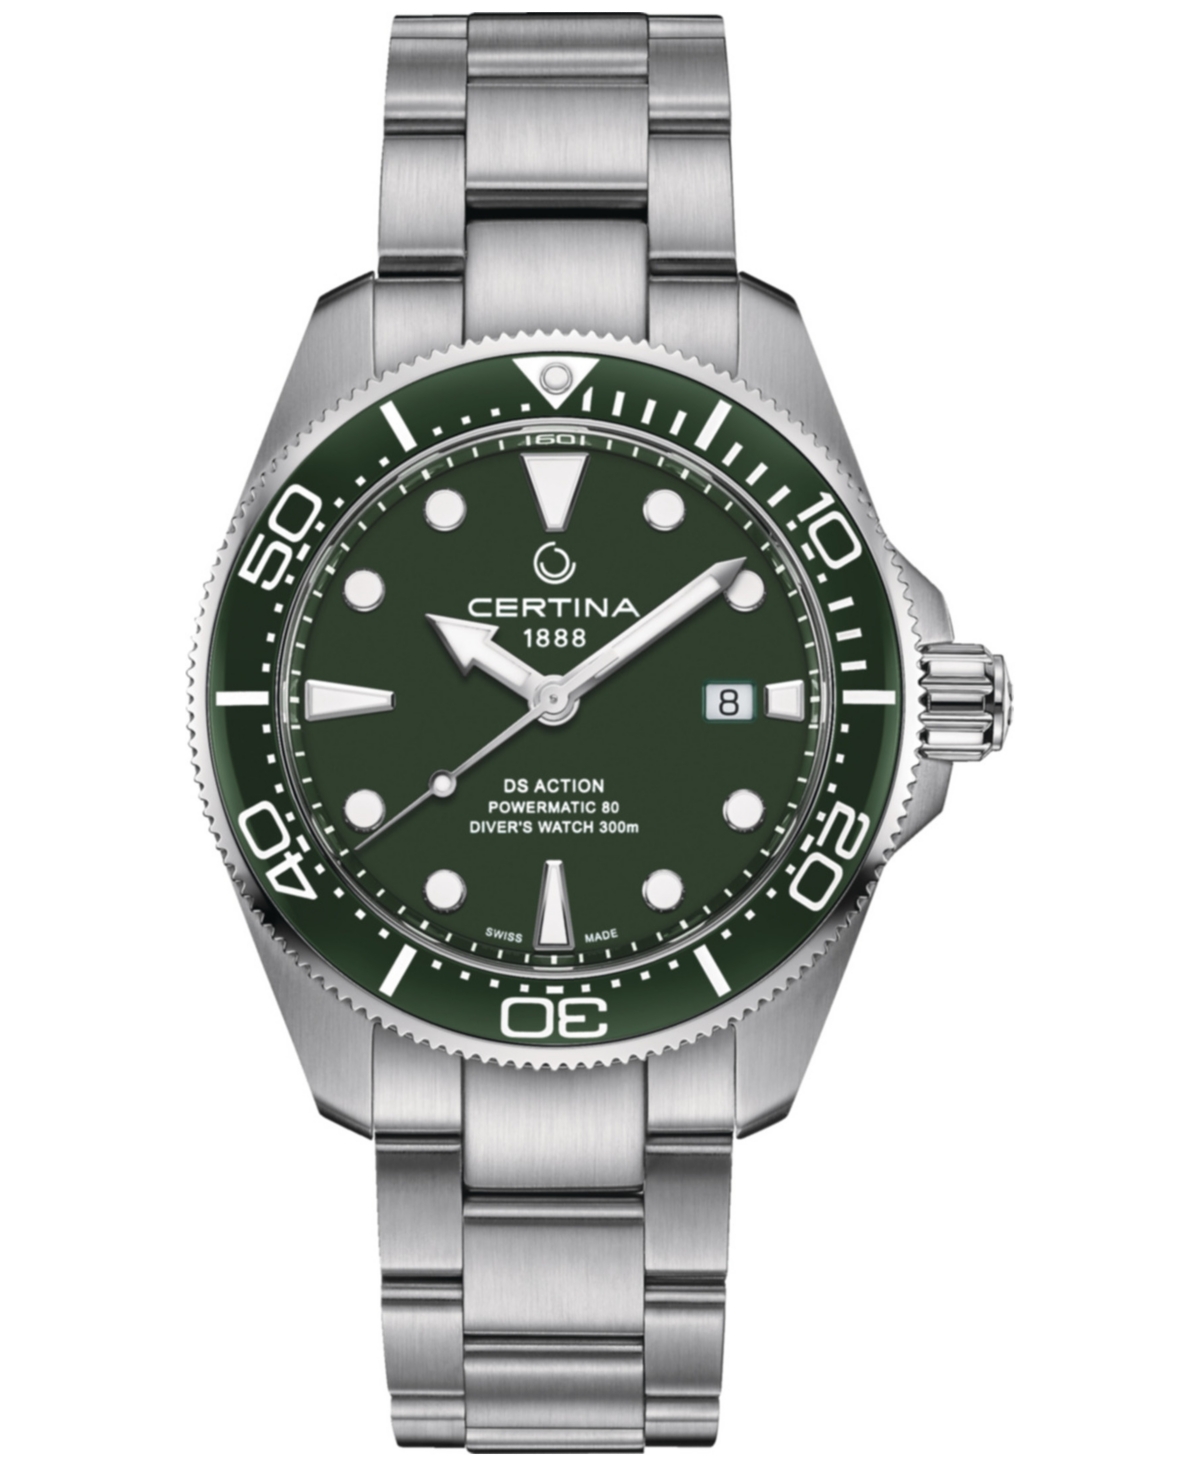 Certina Men's Swiss Automatic Ds Action Diver Stainless Steel Bracelet Watch 43mm In Green